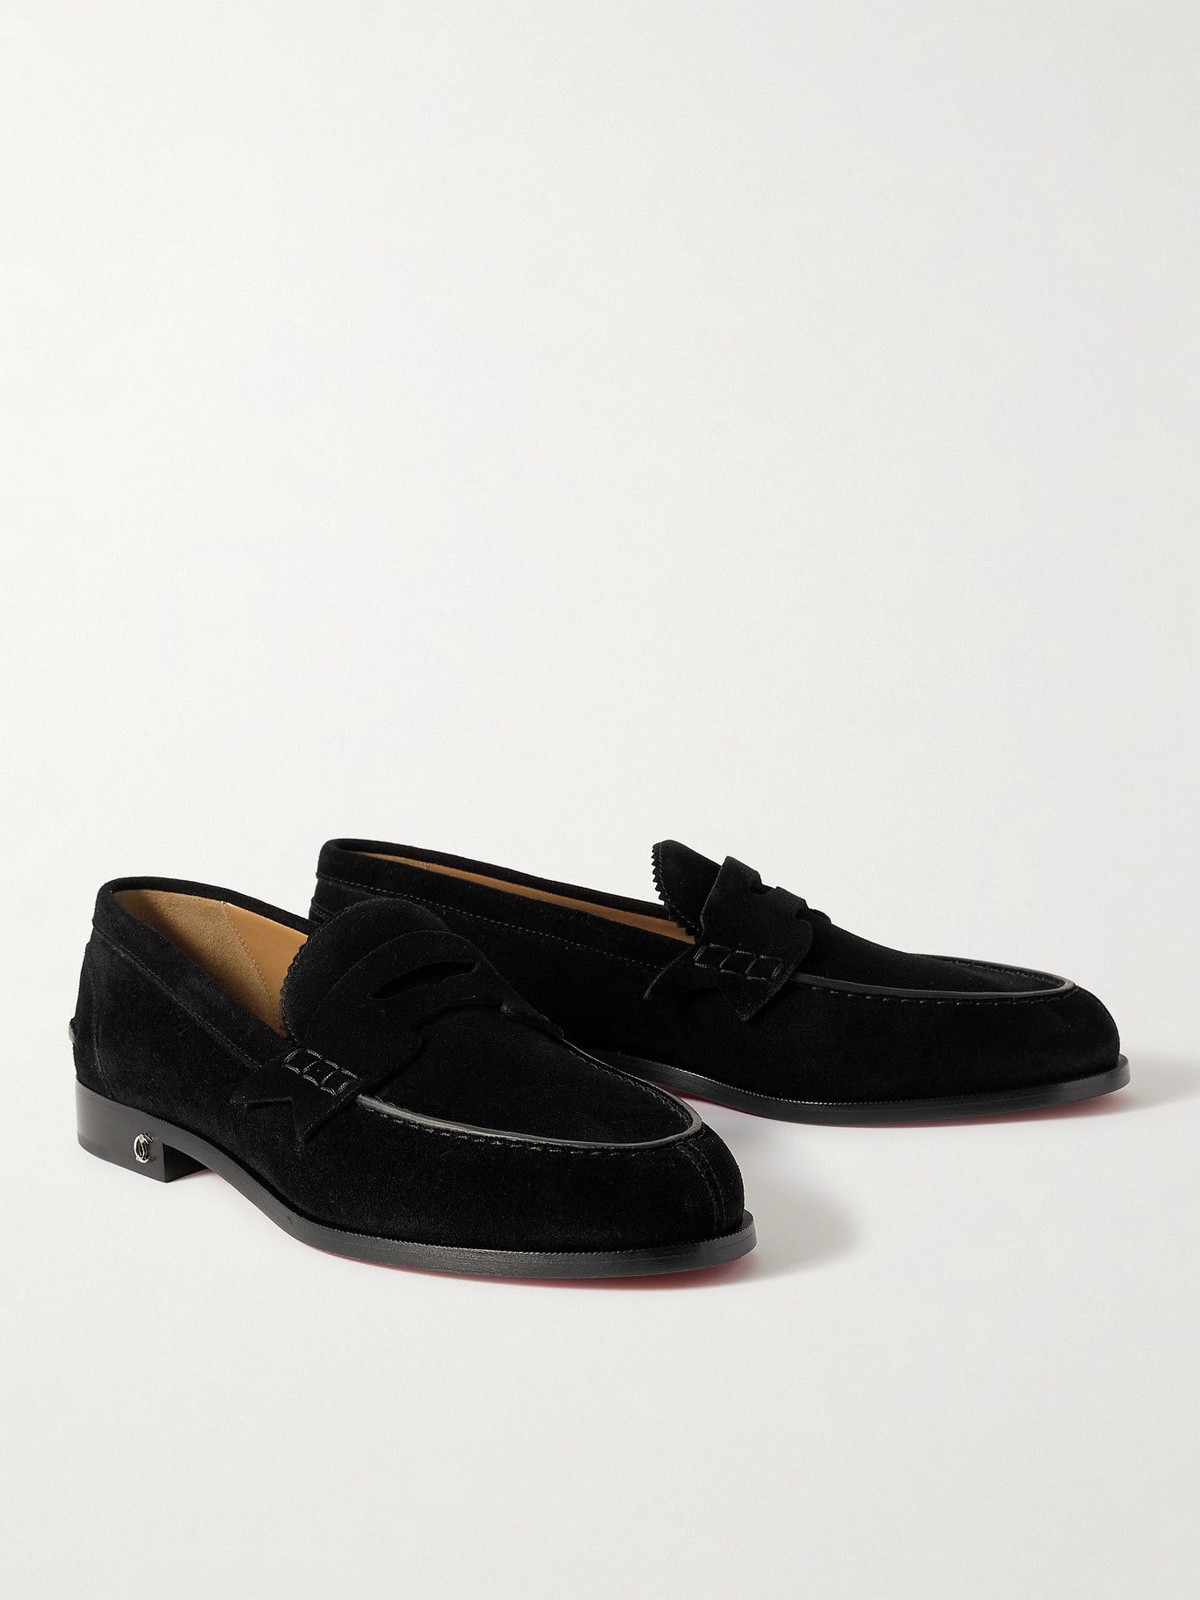 Christian Louboutin Men's Our Georges Suede Loafer